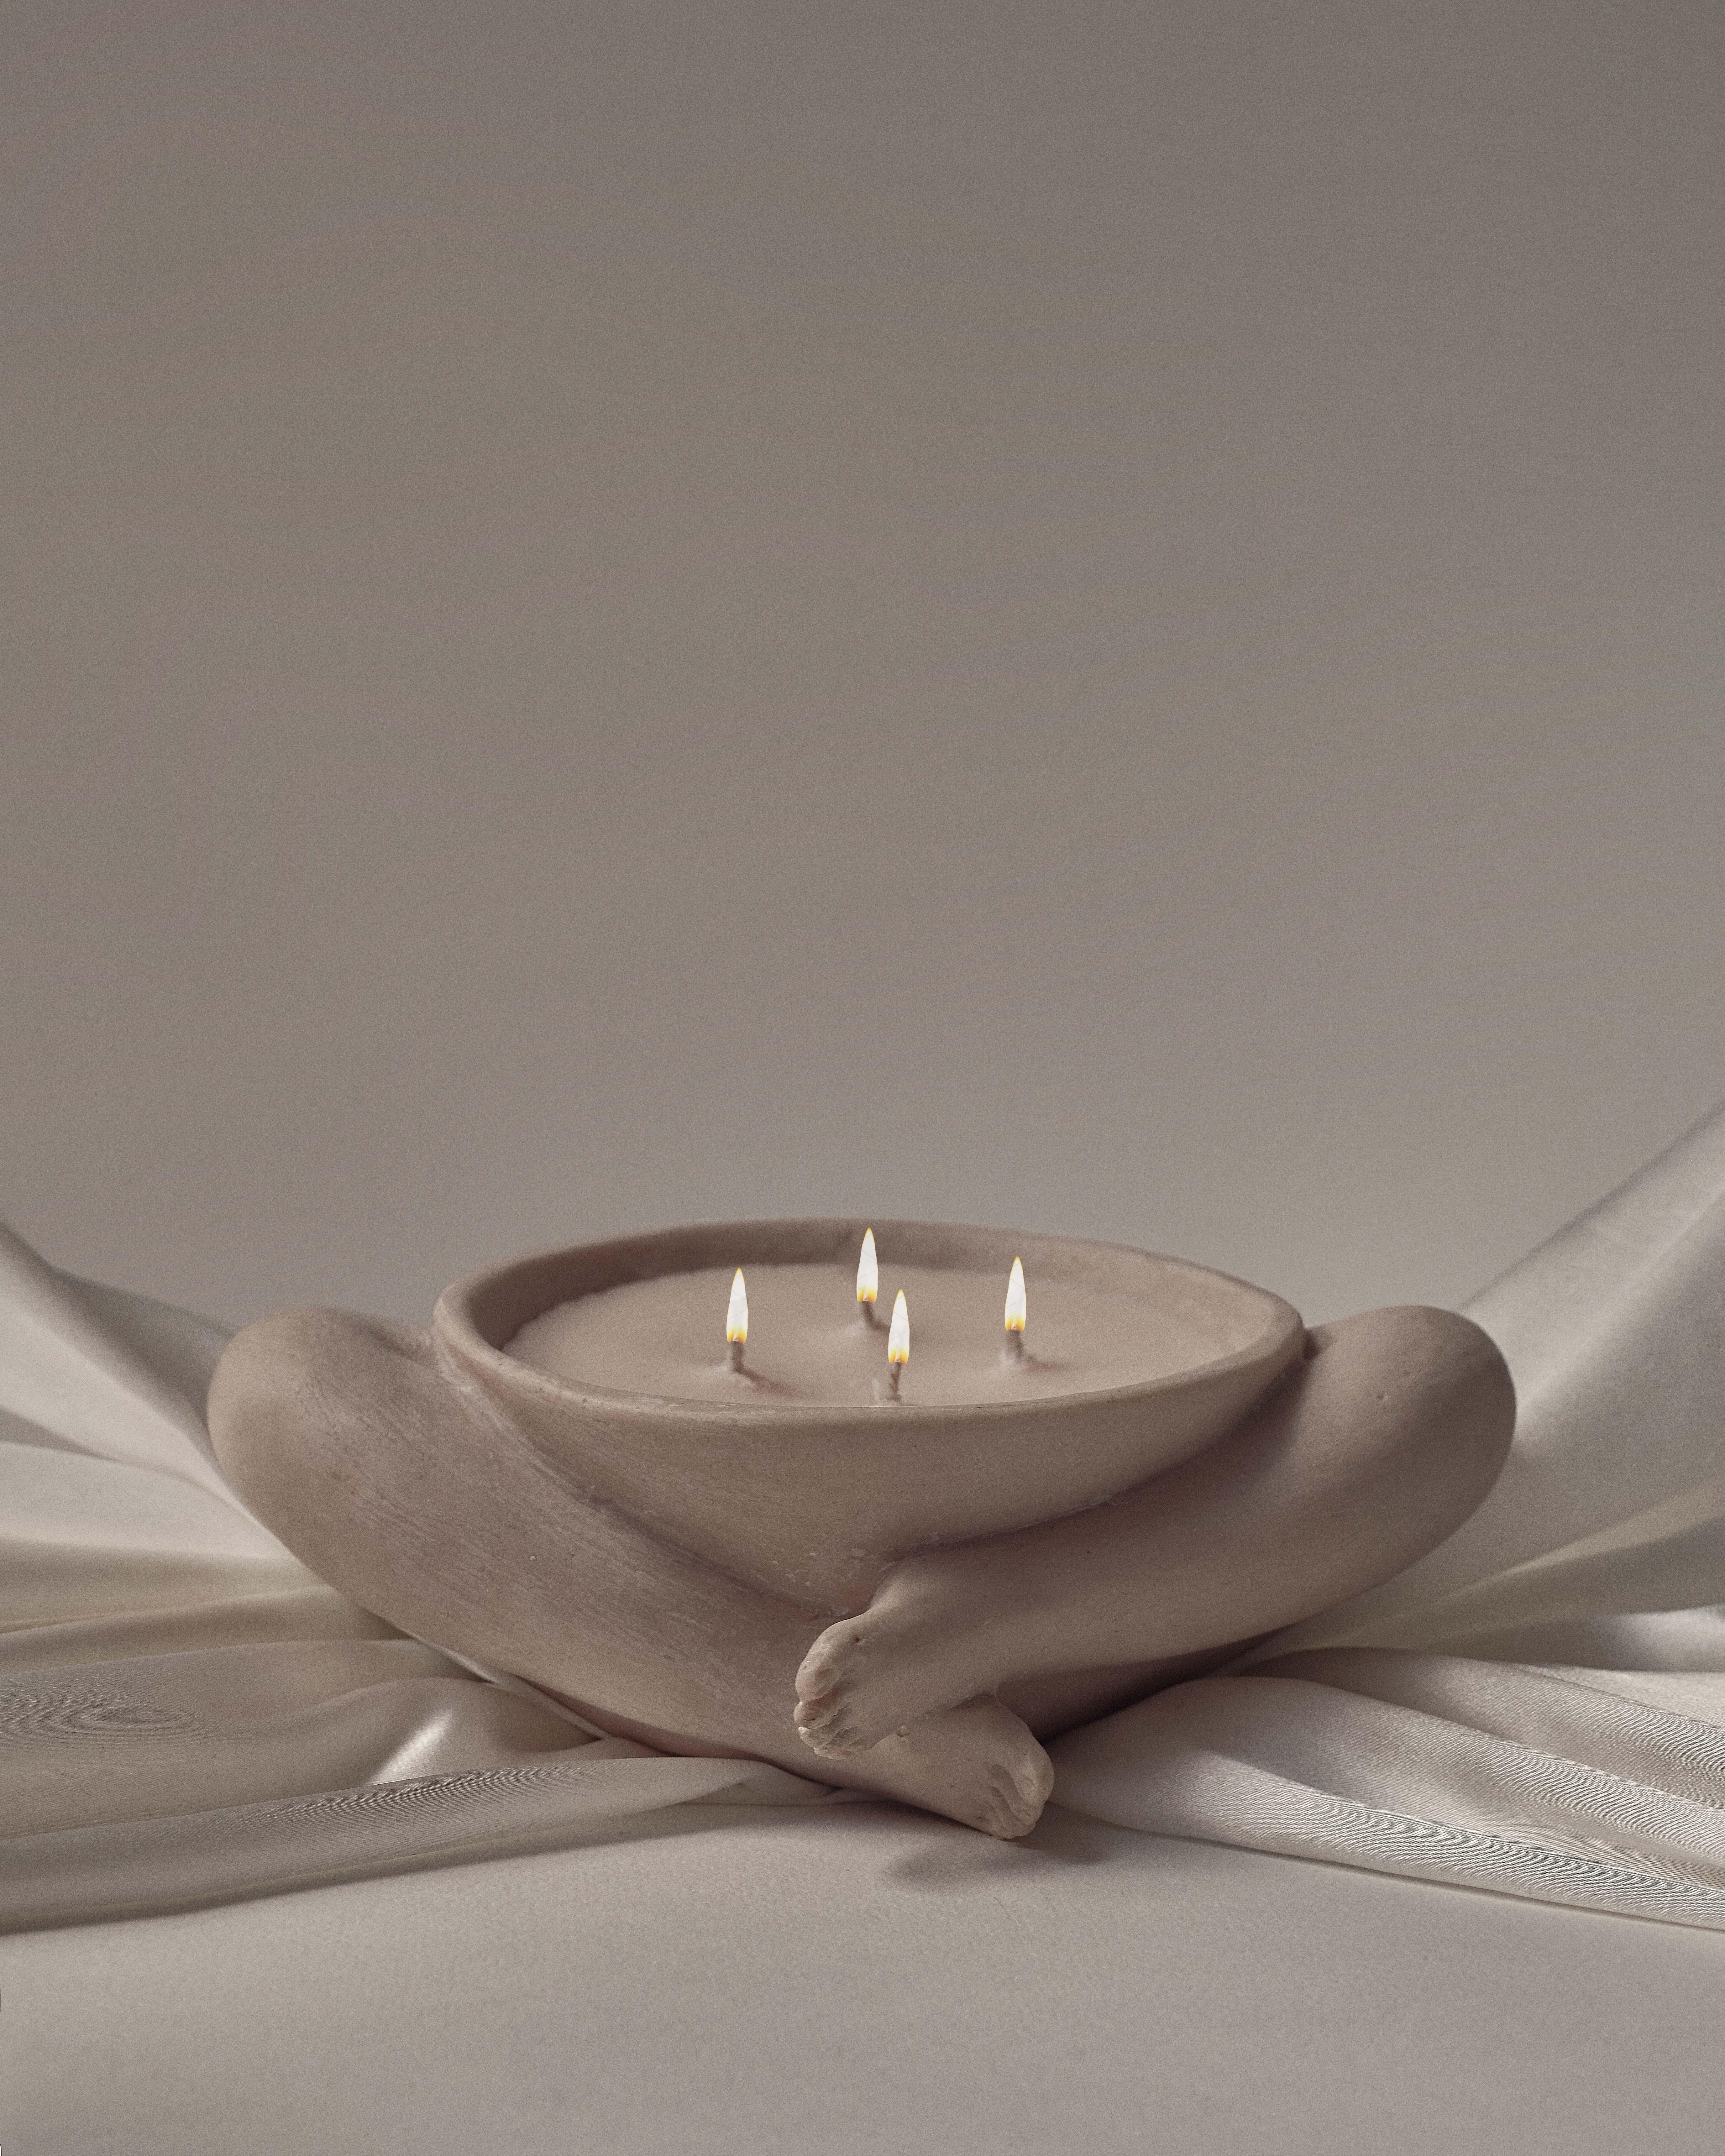 The Sandalwood Sculpture in ivory stone is a decorative, hand-sculpted object that doubles as a candle carrying notes of star anise, cedar leaf, sandalwood, amber, cedarwood and musk.

Each piece is carefully hand-sculpted in clay and later hand